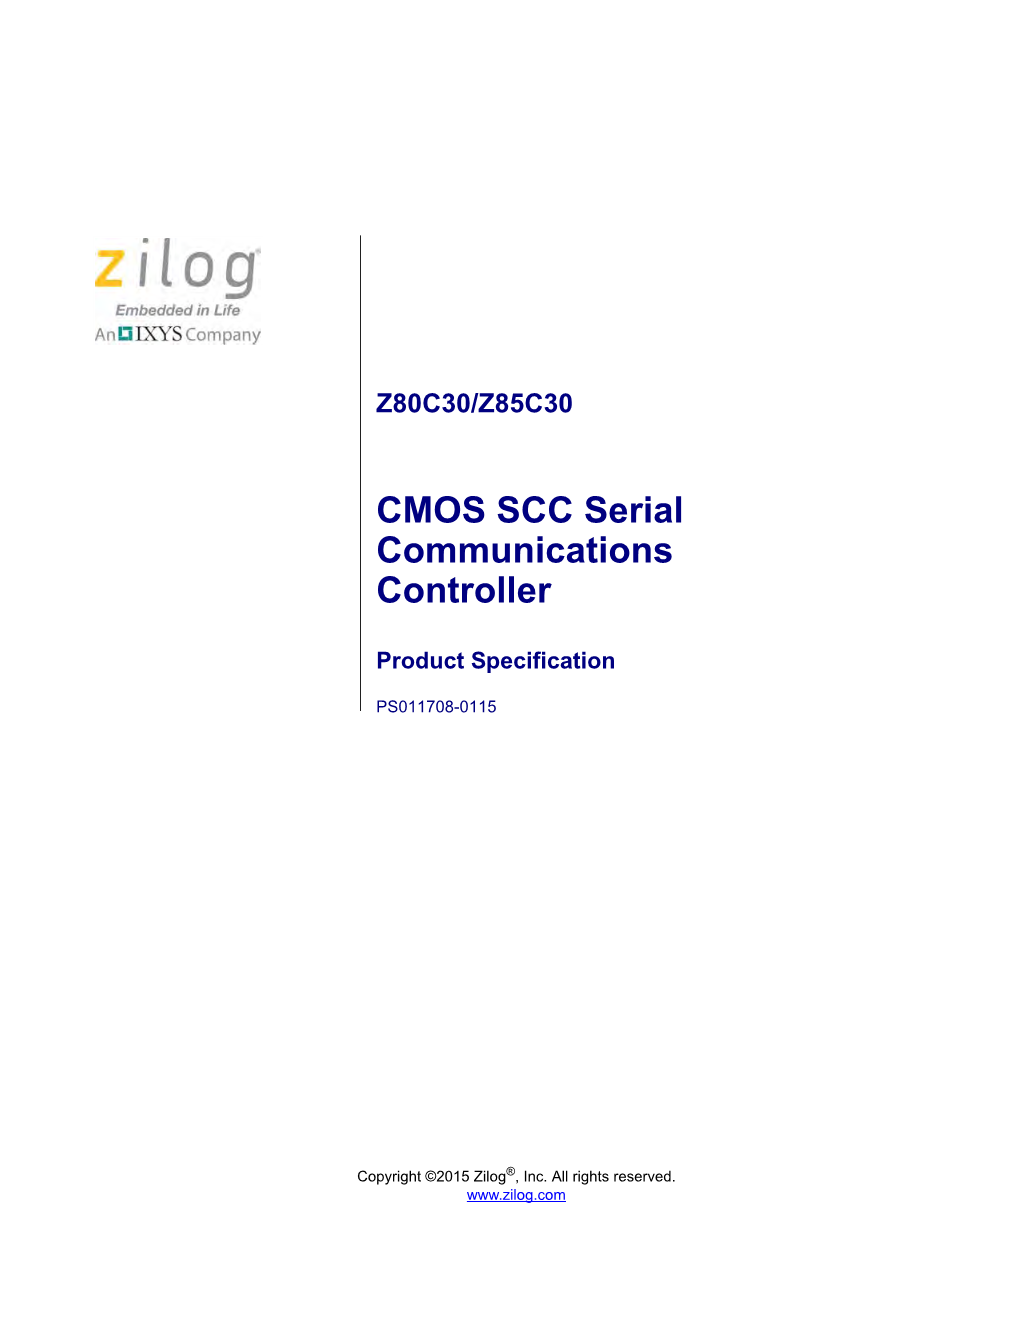 CMOS SCC Serial Communications Controller Product Specification